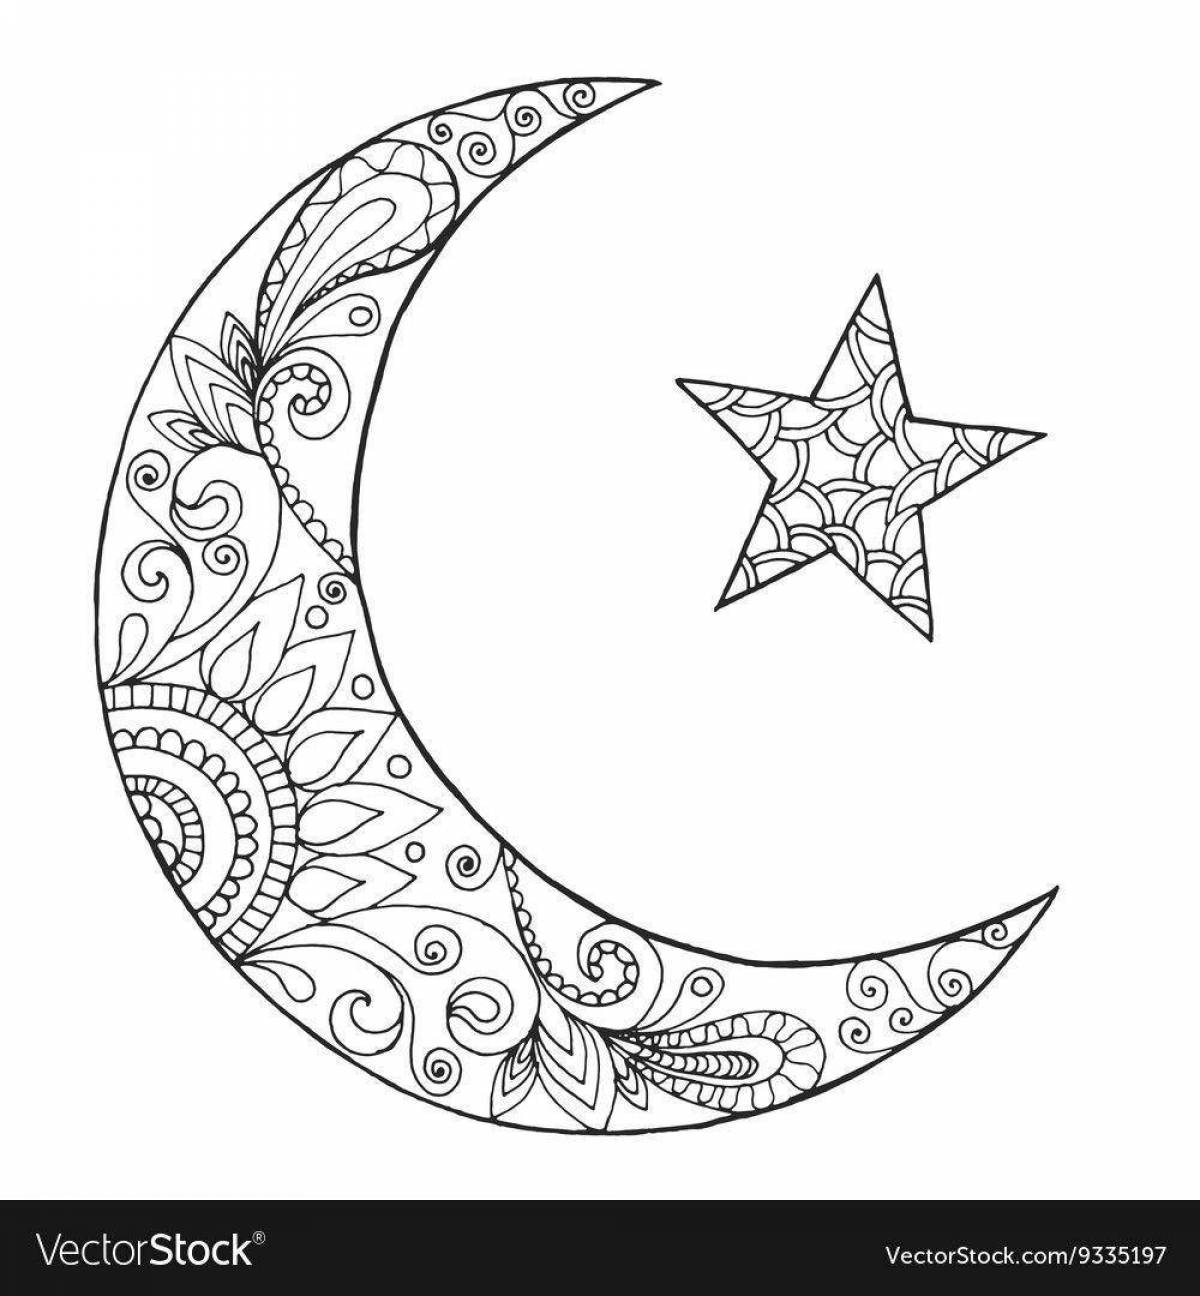 Delicate crescent moon coloring